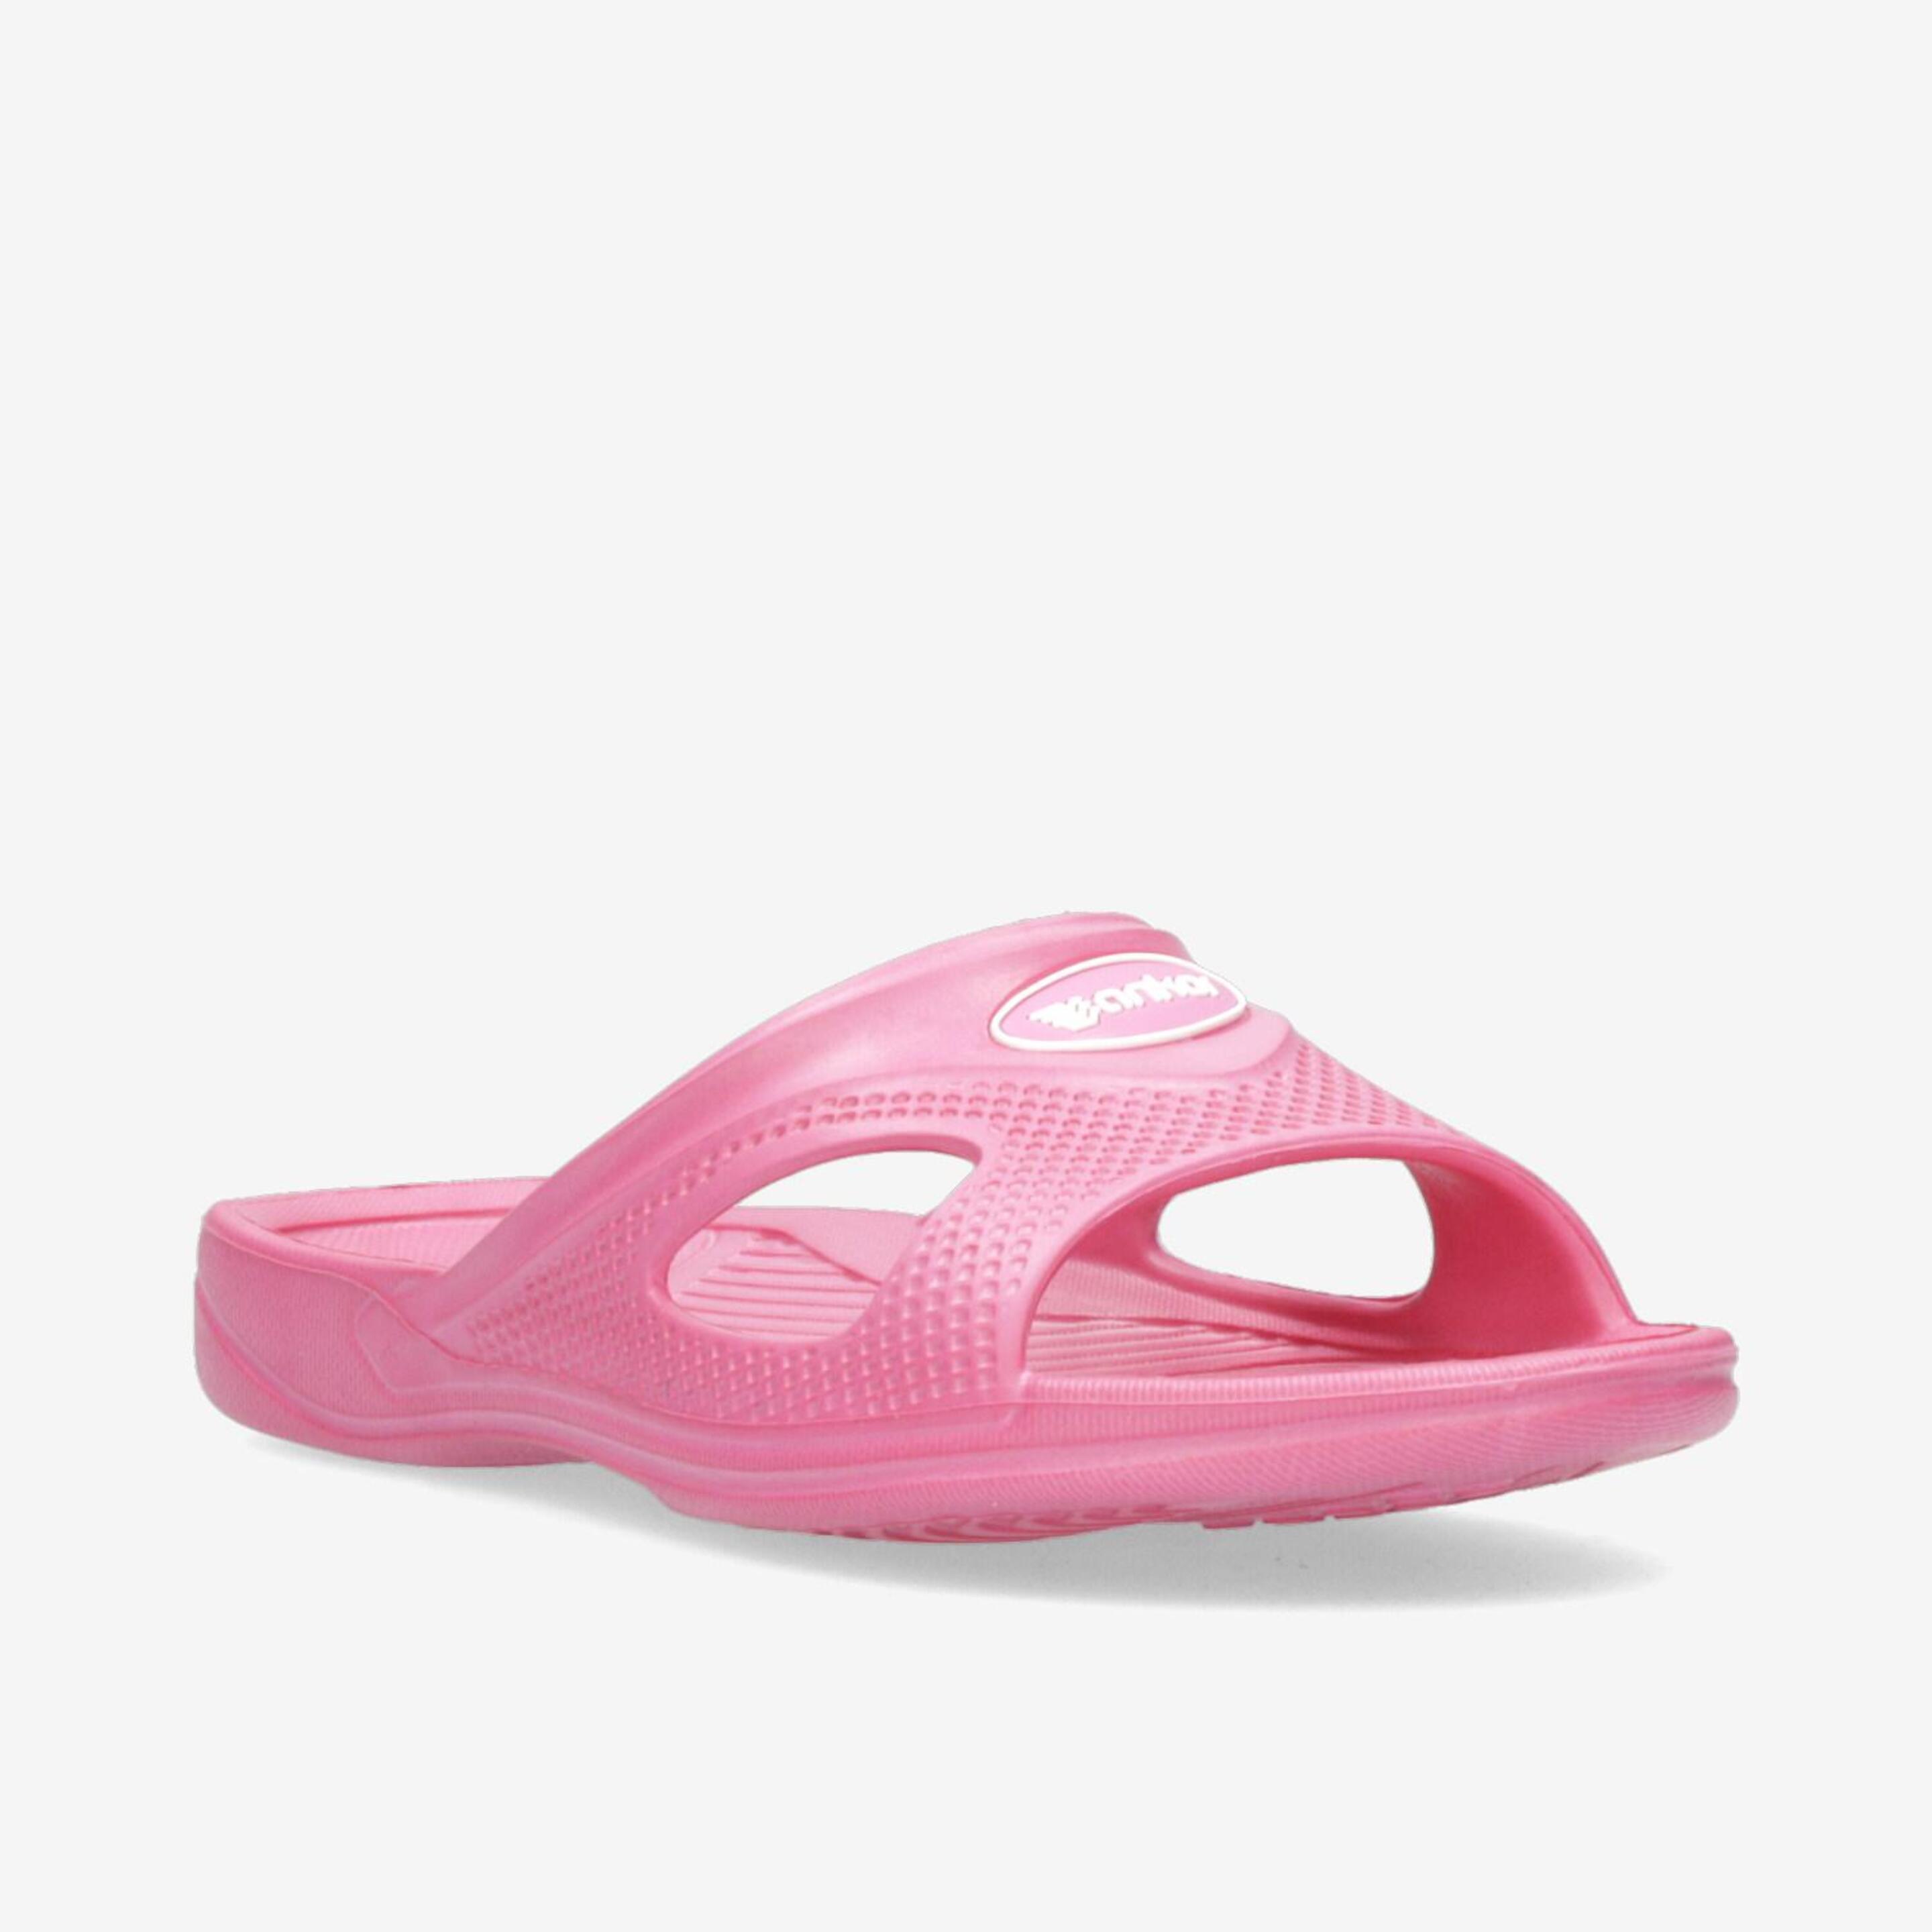 Ankor Done - Rosa - Chanclas Mujer